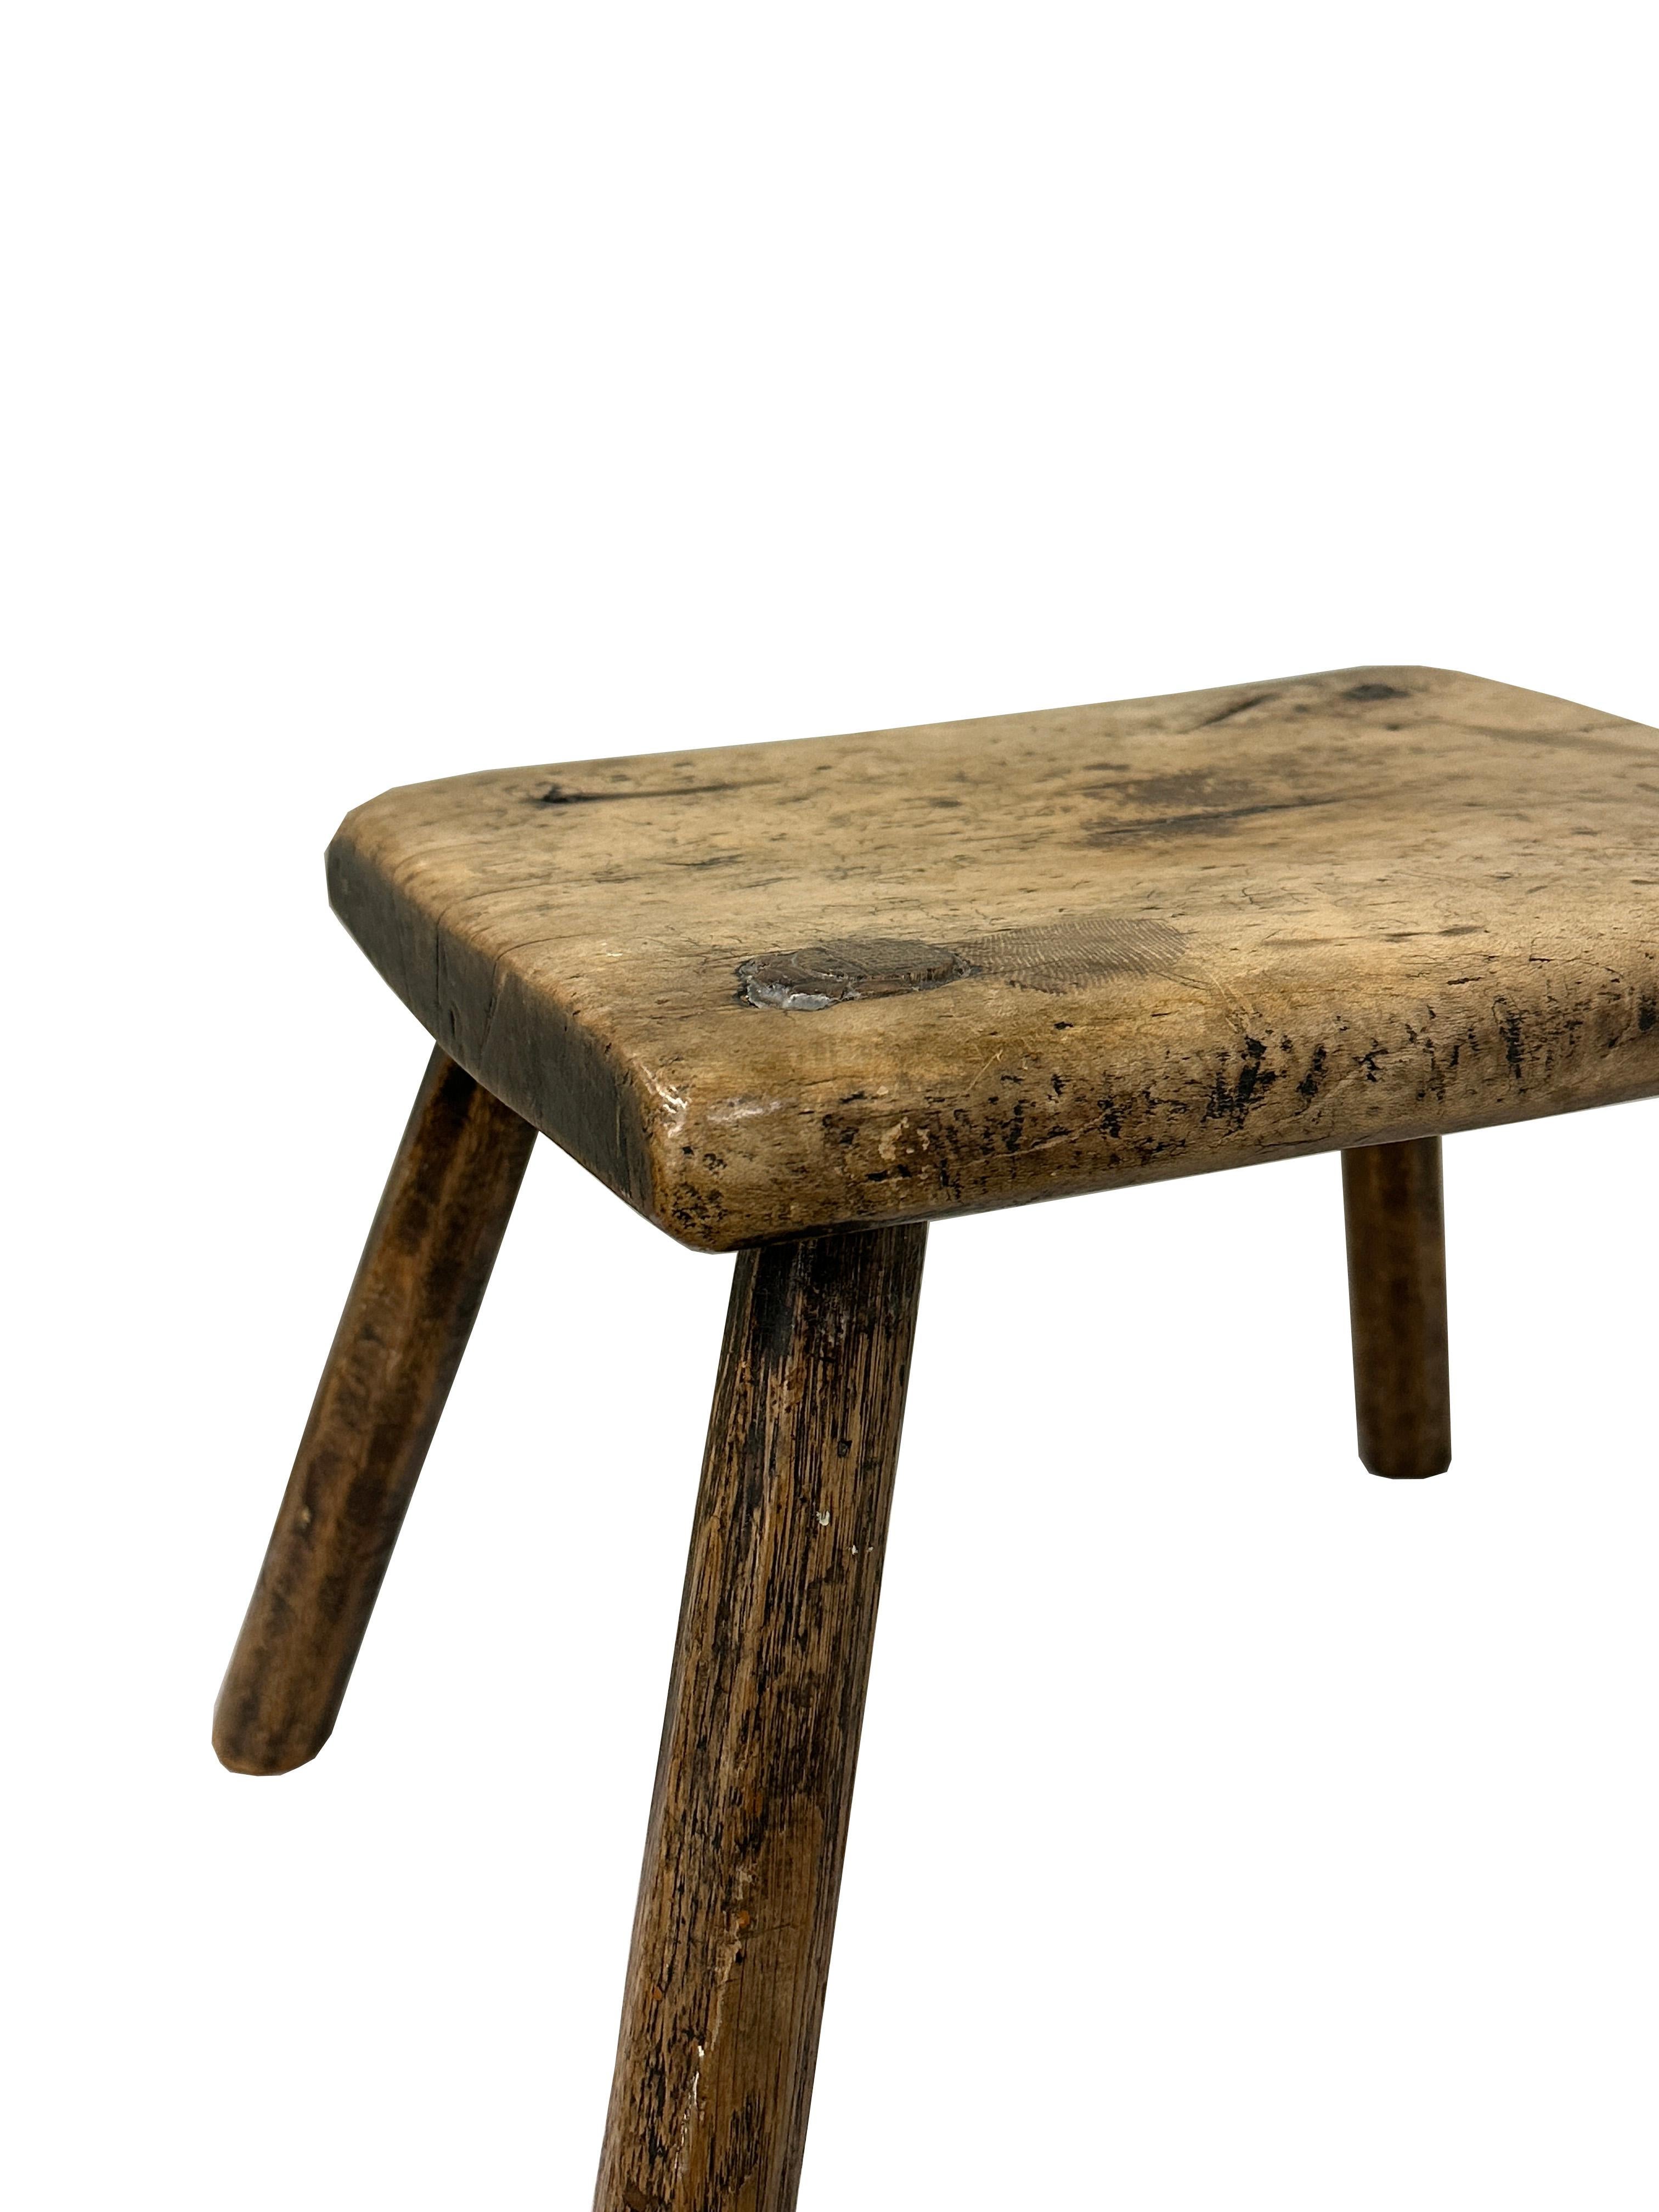 Early 18c Ash Stool In Distressed Condition For Sale In New York, NY